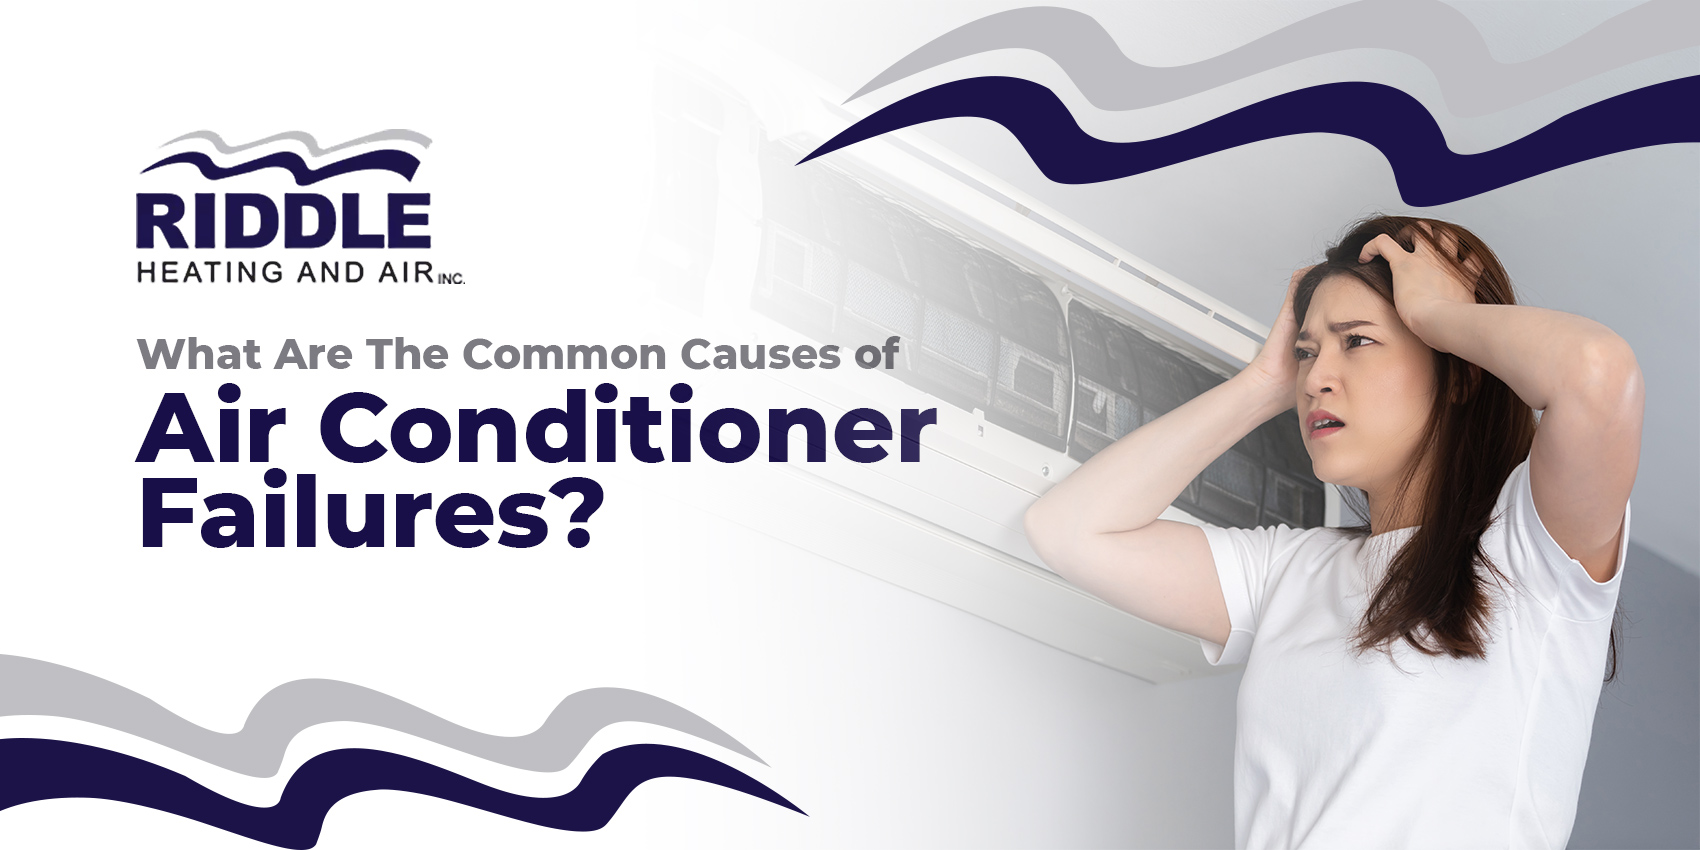 What Are The Common Causes of Air Conditioner Failures?